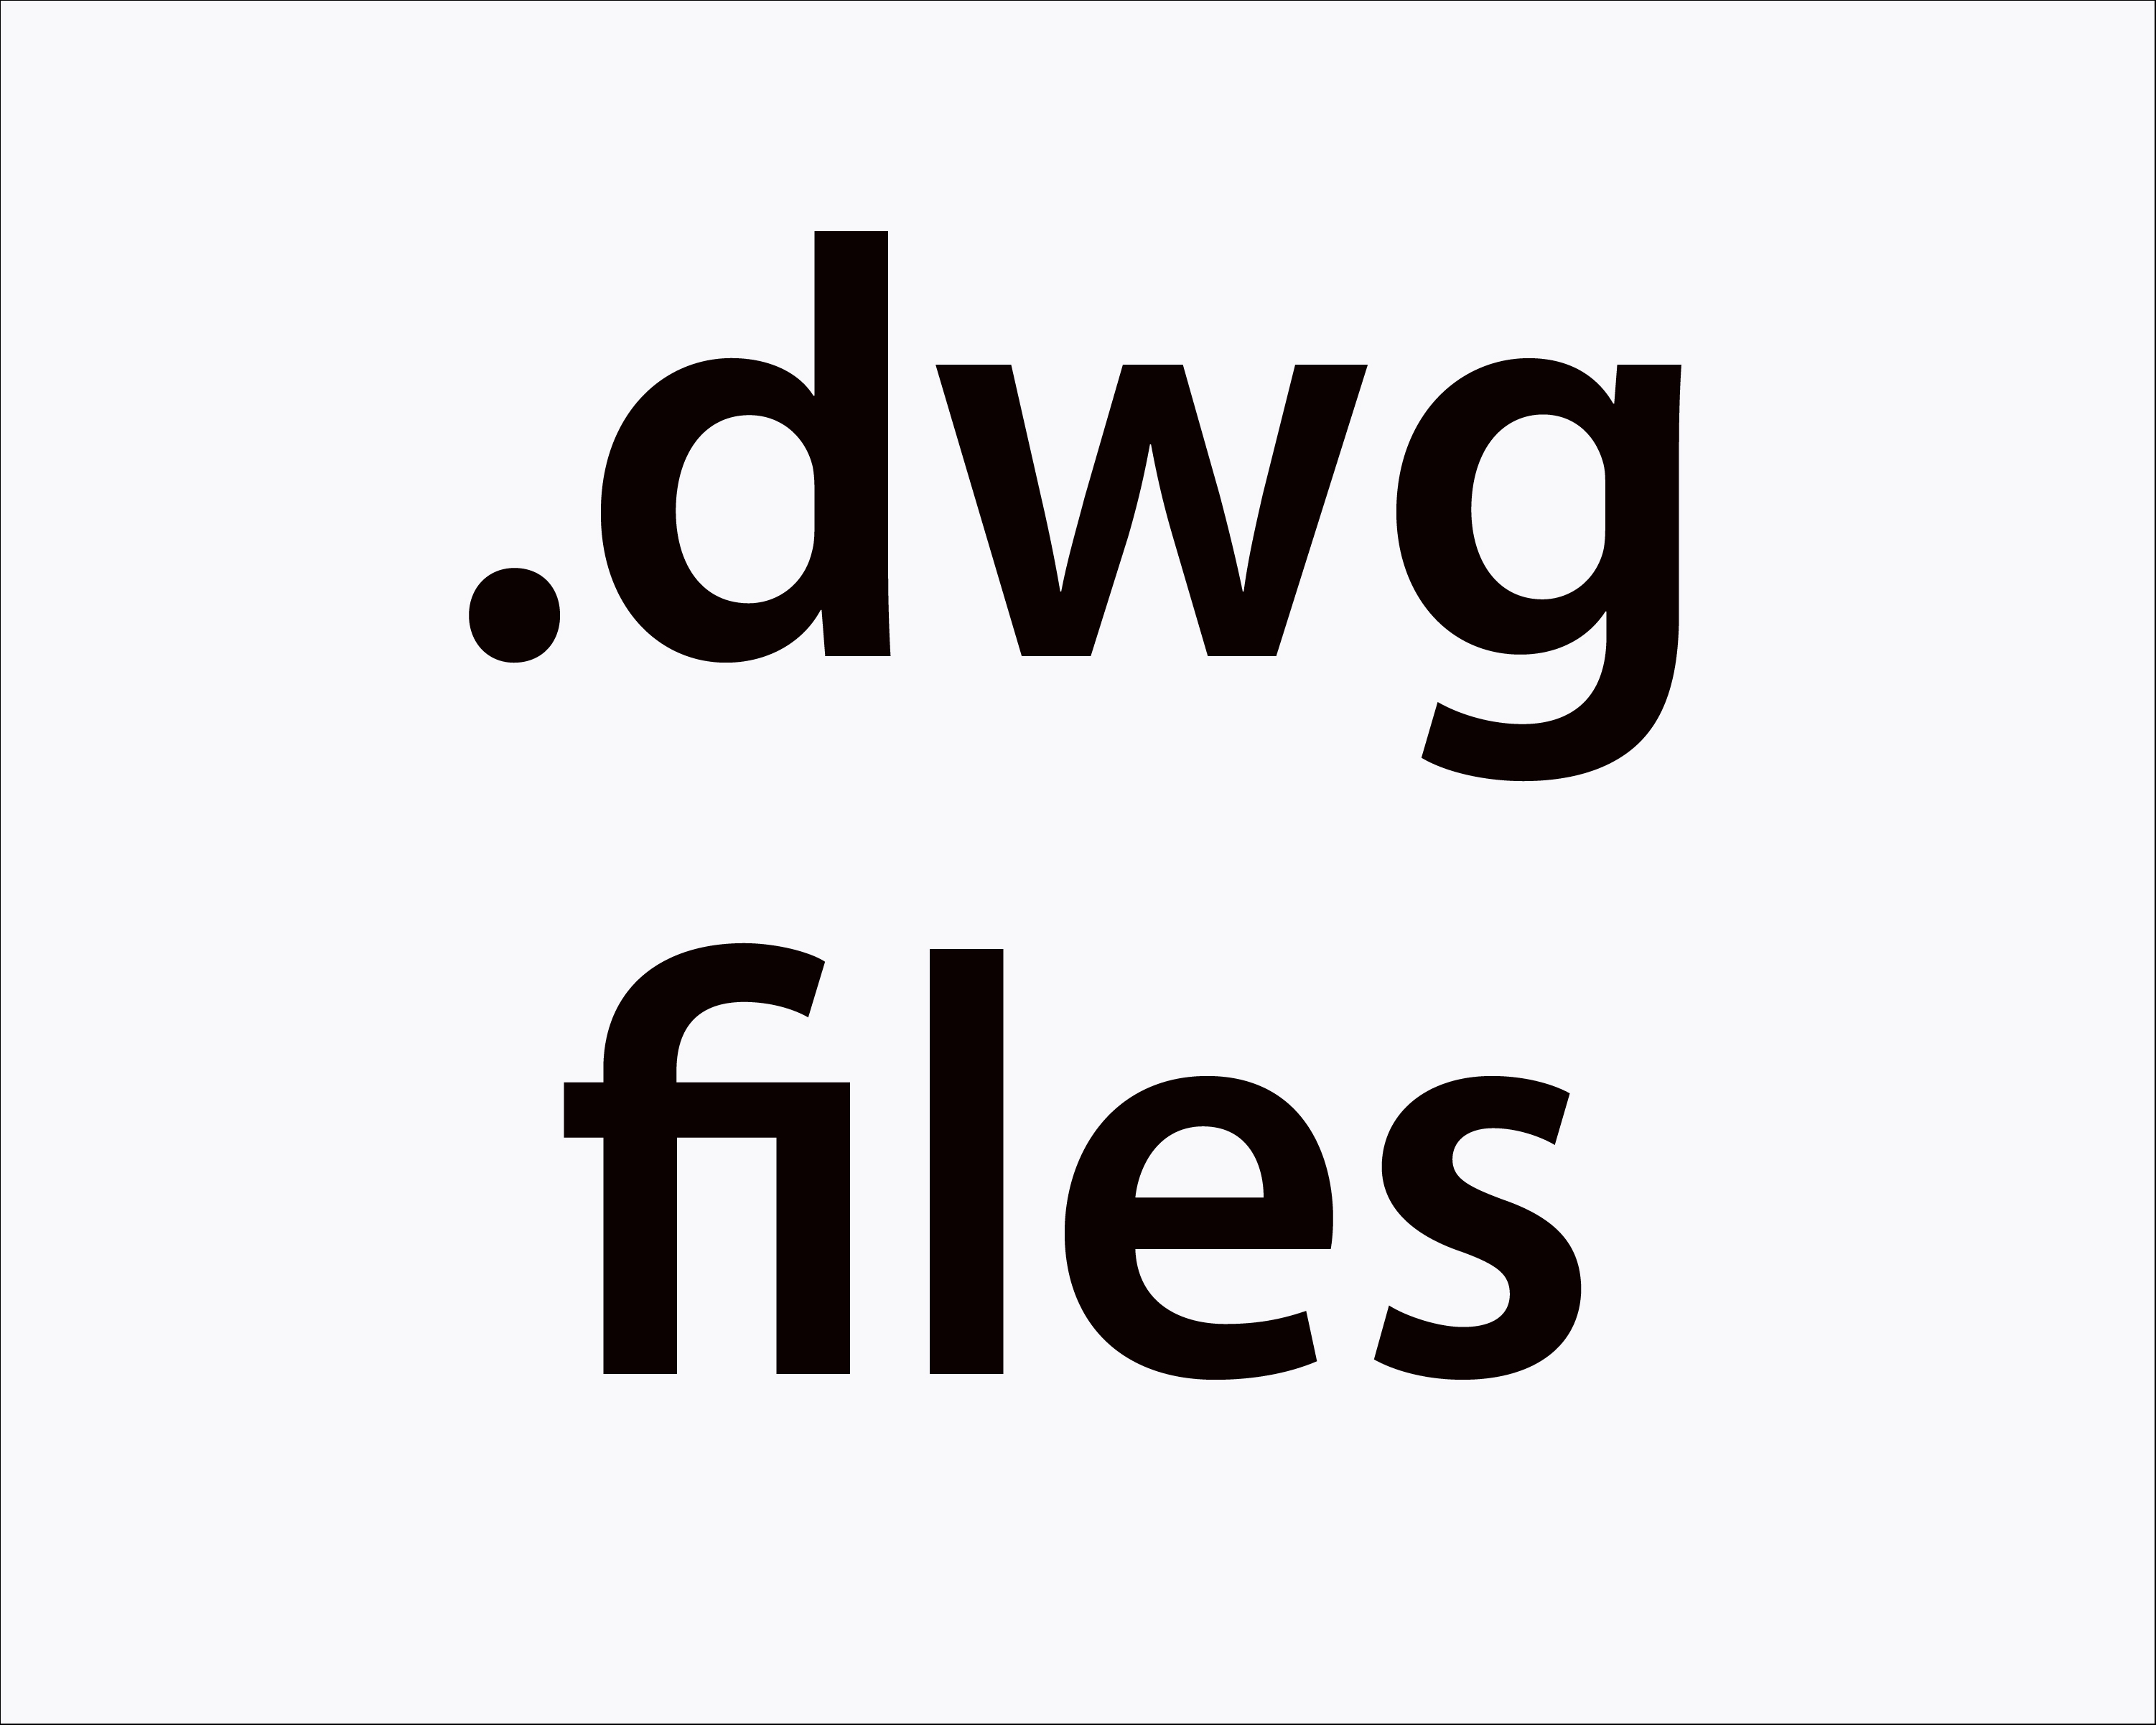 CAD drawing (.dwg) files